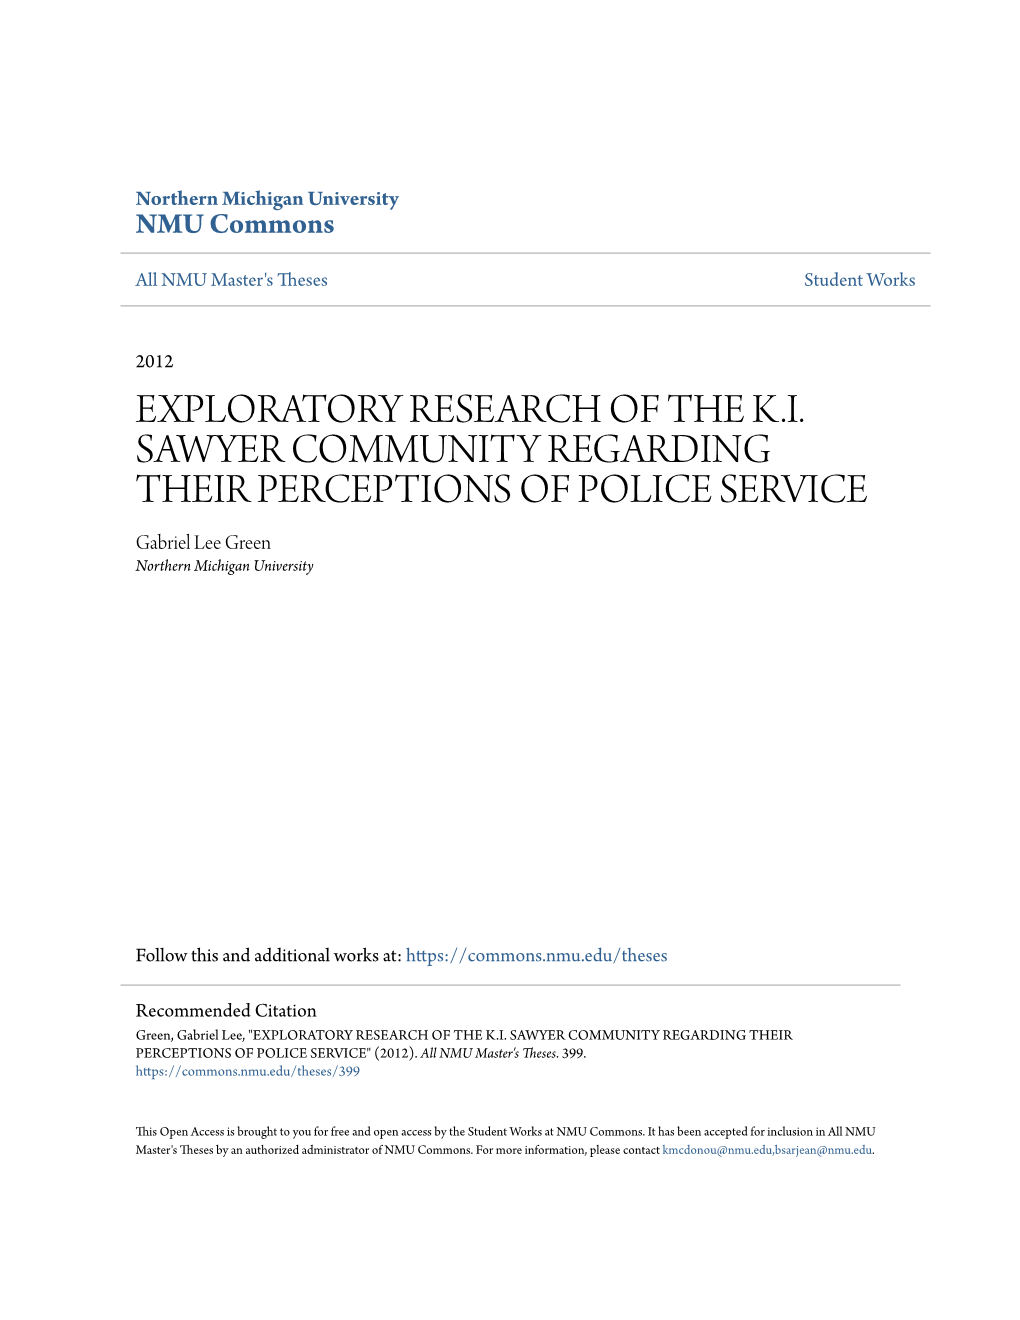 EXPLORATORY RESEARCH of the K.I. SAWYER COMMUNITY REGARDING THEIR PERCEPTIONS of POLICE SERVICE Gabriel Lee Green Northern Michigan University